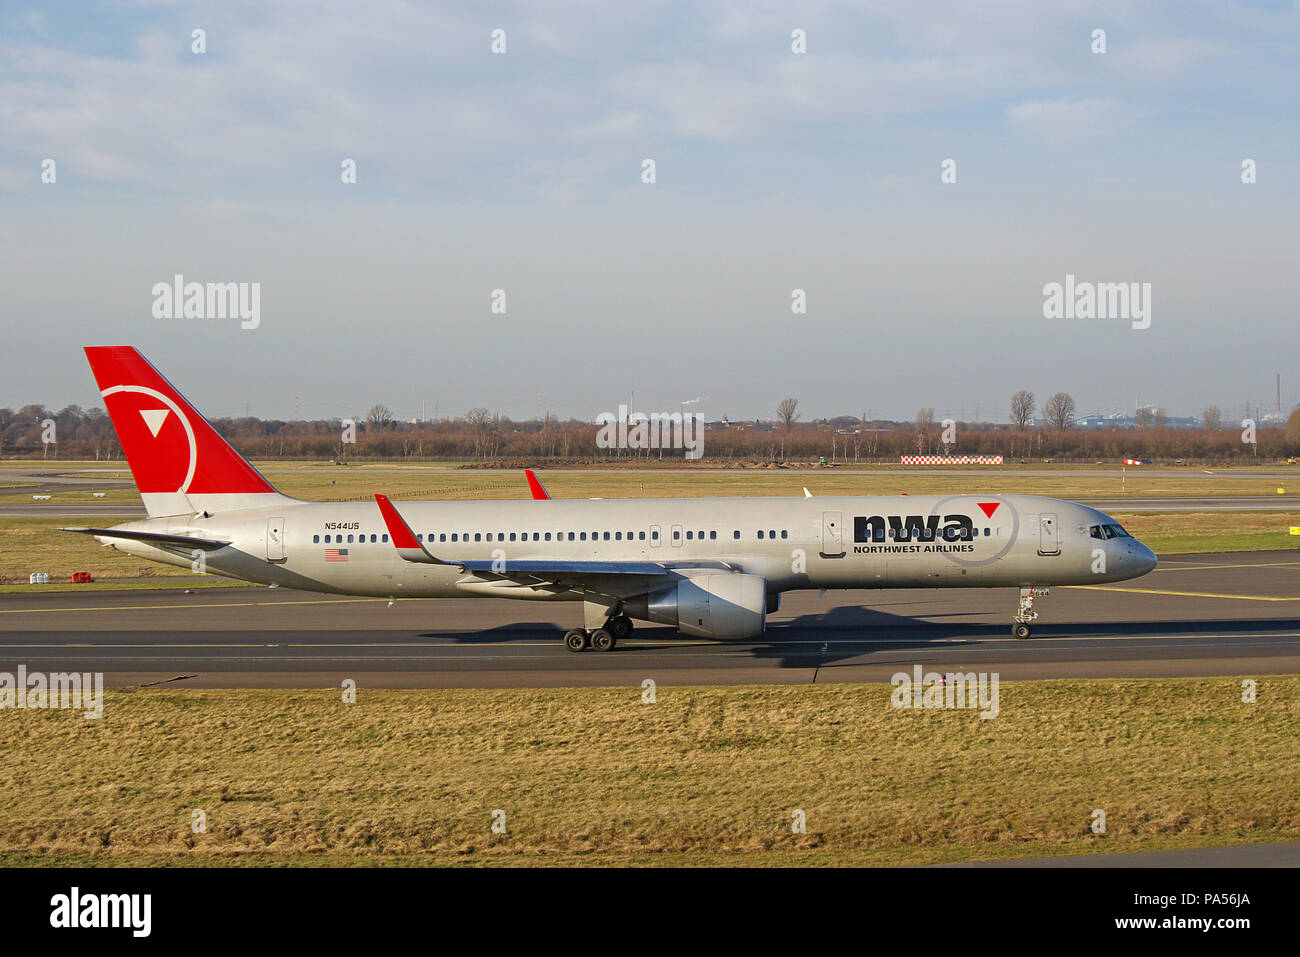 Dusseldorf, Germany - January 26, 2008: Boeing 757-200 of Northwest Airlines at the airport of Dusseldorf while taxiing Stock Photo